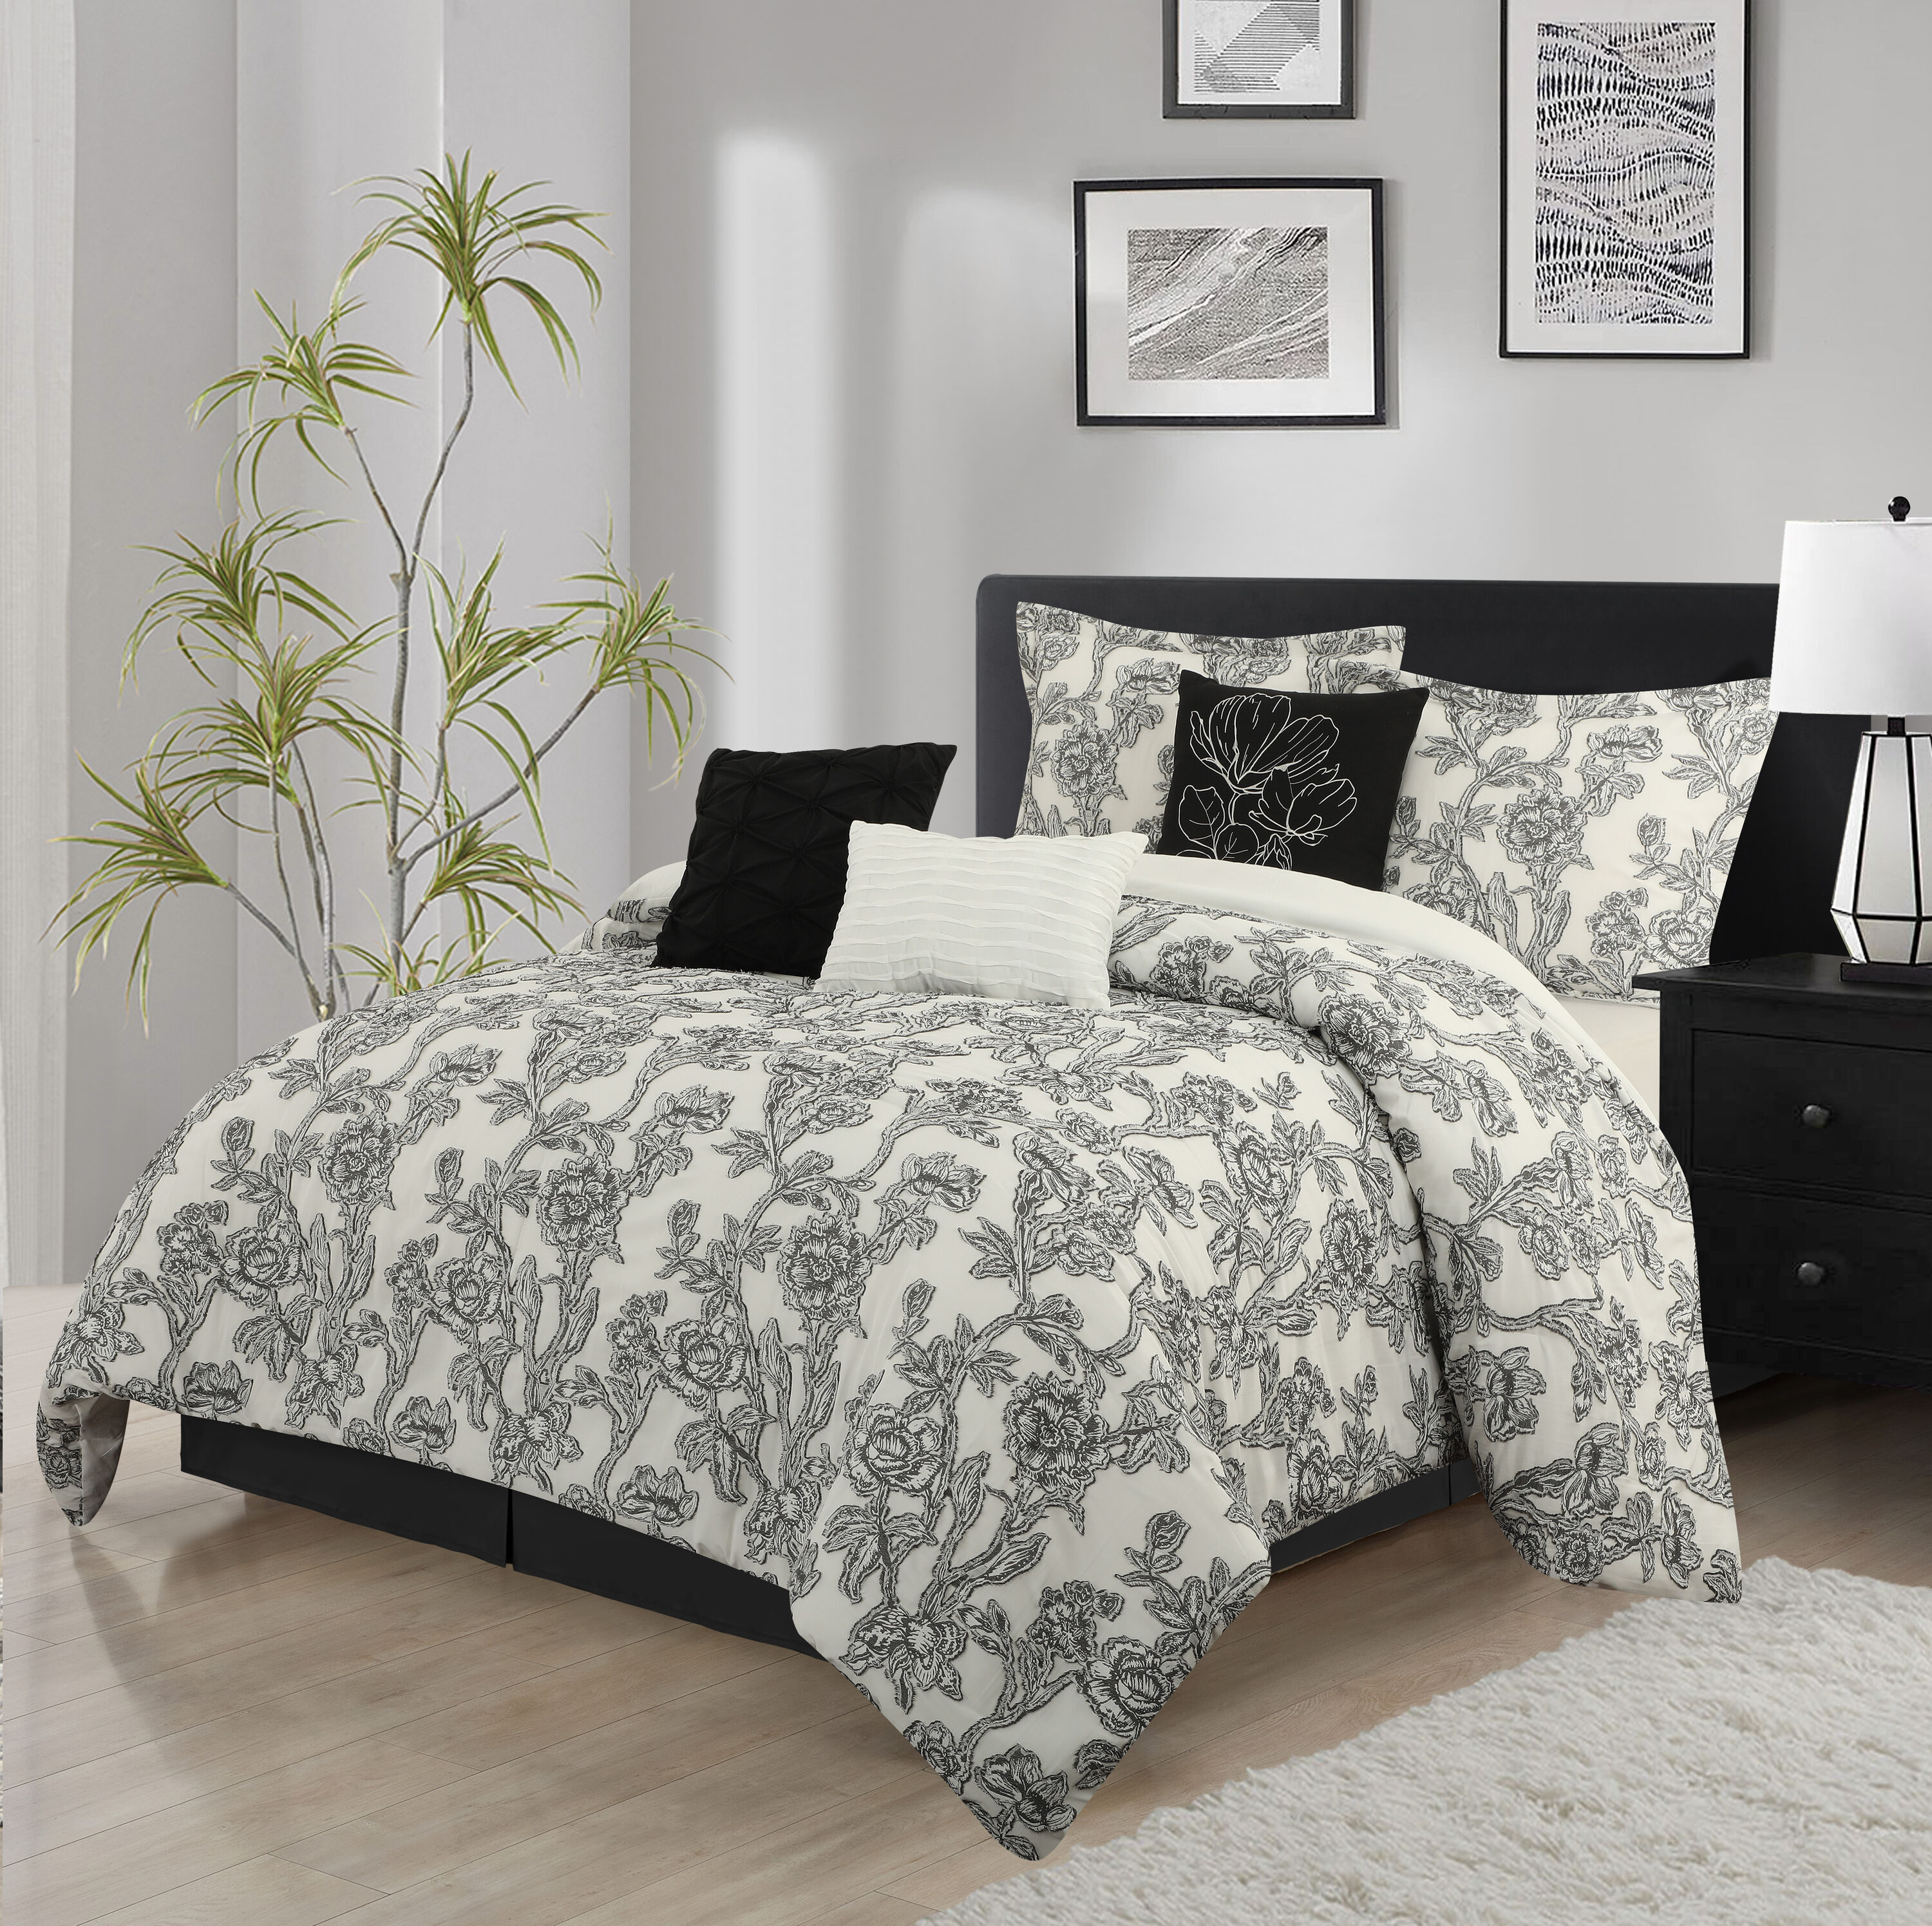 Grand Avenue Embrace timeless allure with our Floral Comforter Set. The  striking black and white palette effortlessly complements any style. Using  innovative Clip Jacquard technique, intricate floral patterns are woven  into the